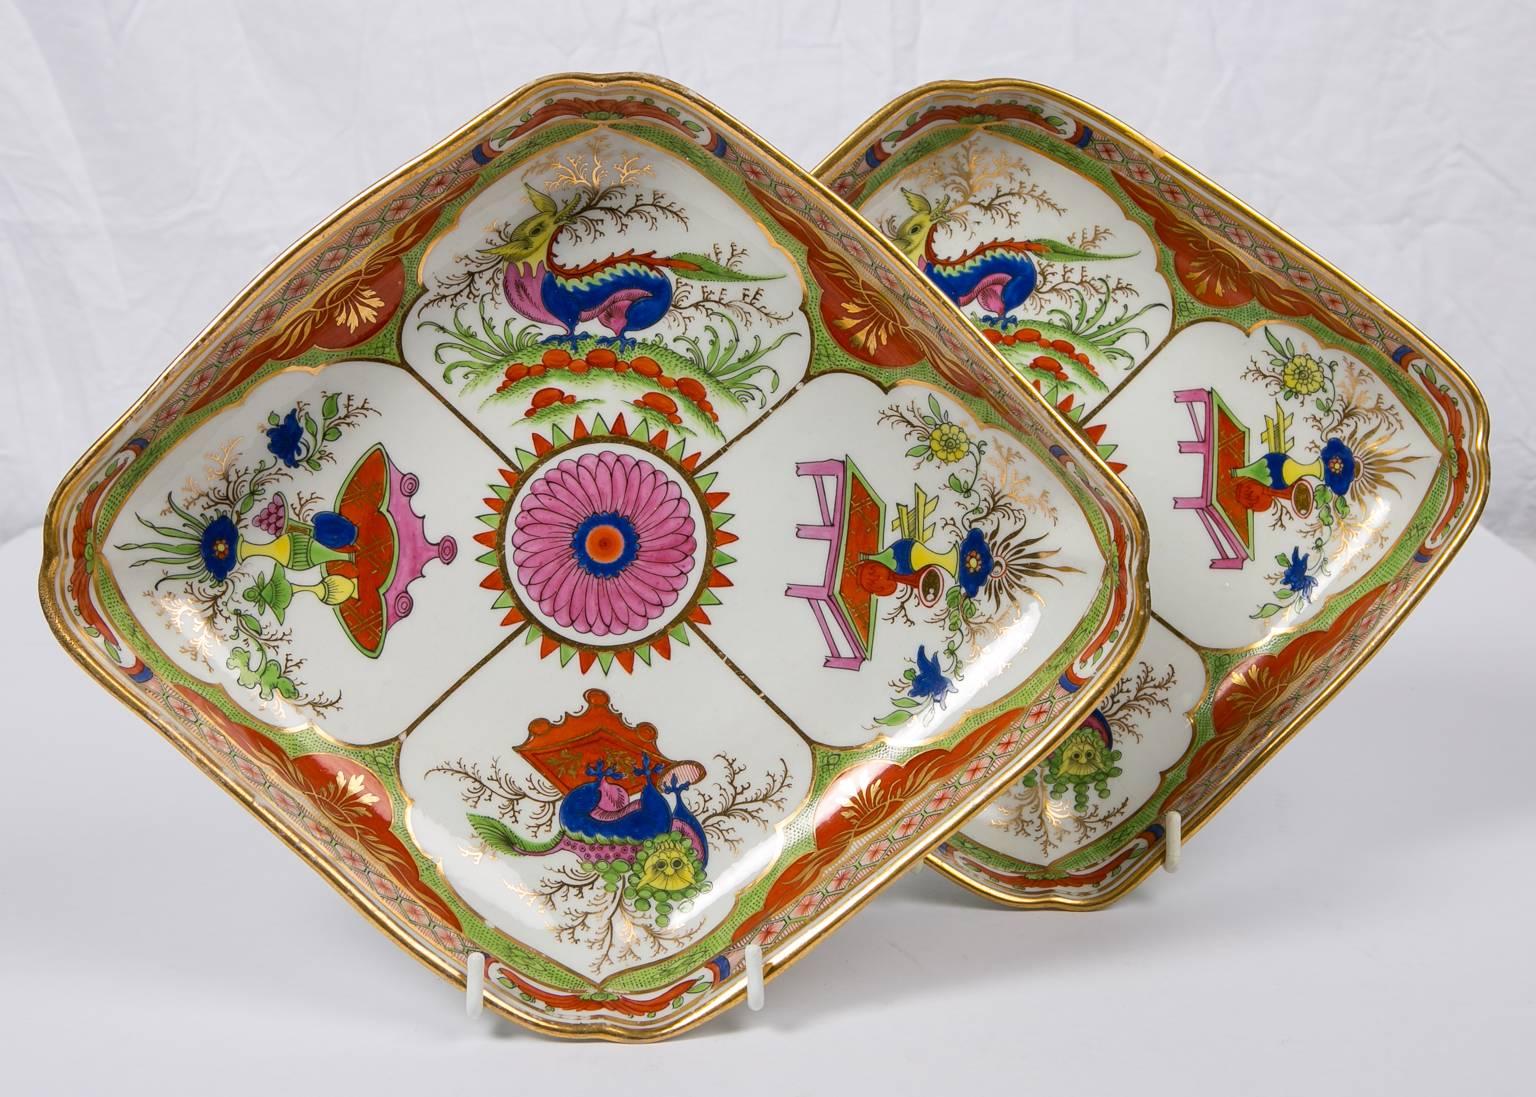 Bengal tiger lozenge shaped dishes a pair made by Chamberlains Worcester. The pattern is an exotic English interpretation of Chinese export porcelains from the Kangxi period. The design features four lappet-shaped panels which alternate between